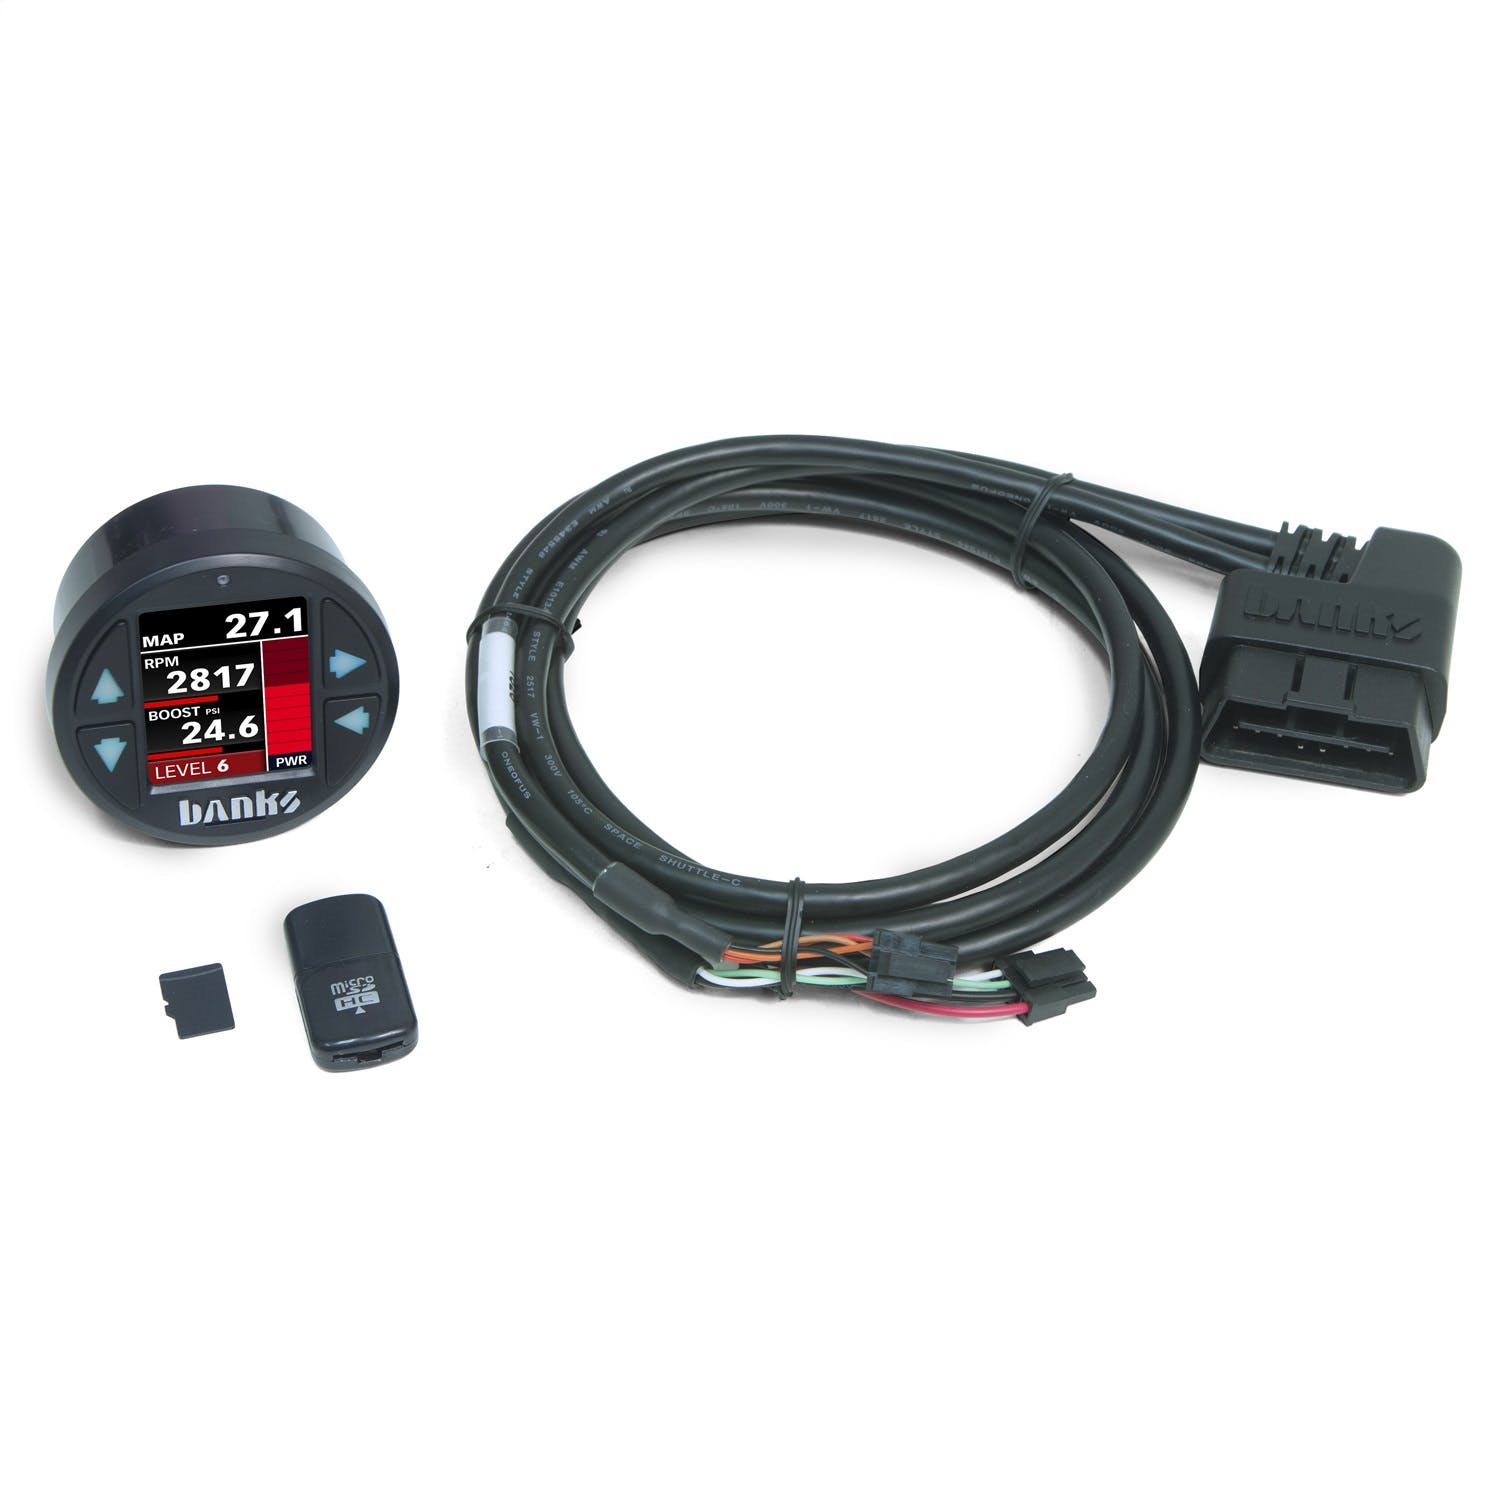 Banks Power 61472 iDash 1.8 DataMonster Upgrade kit; 06-07 5.9L Cummins and 08-10 6.4L Ford Powers